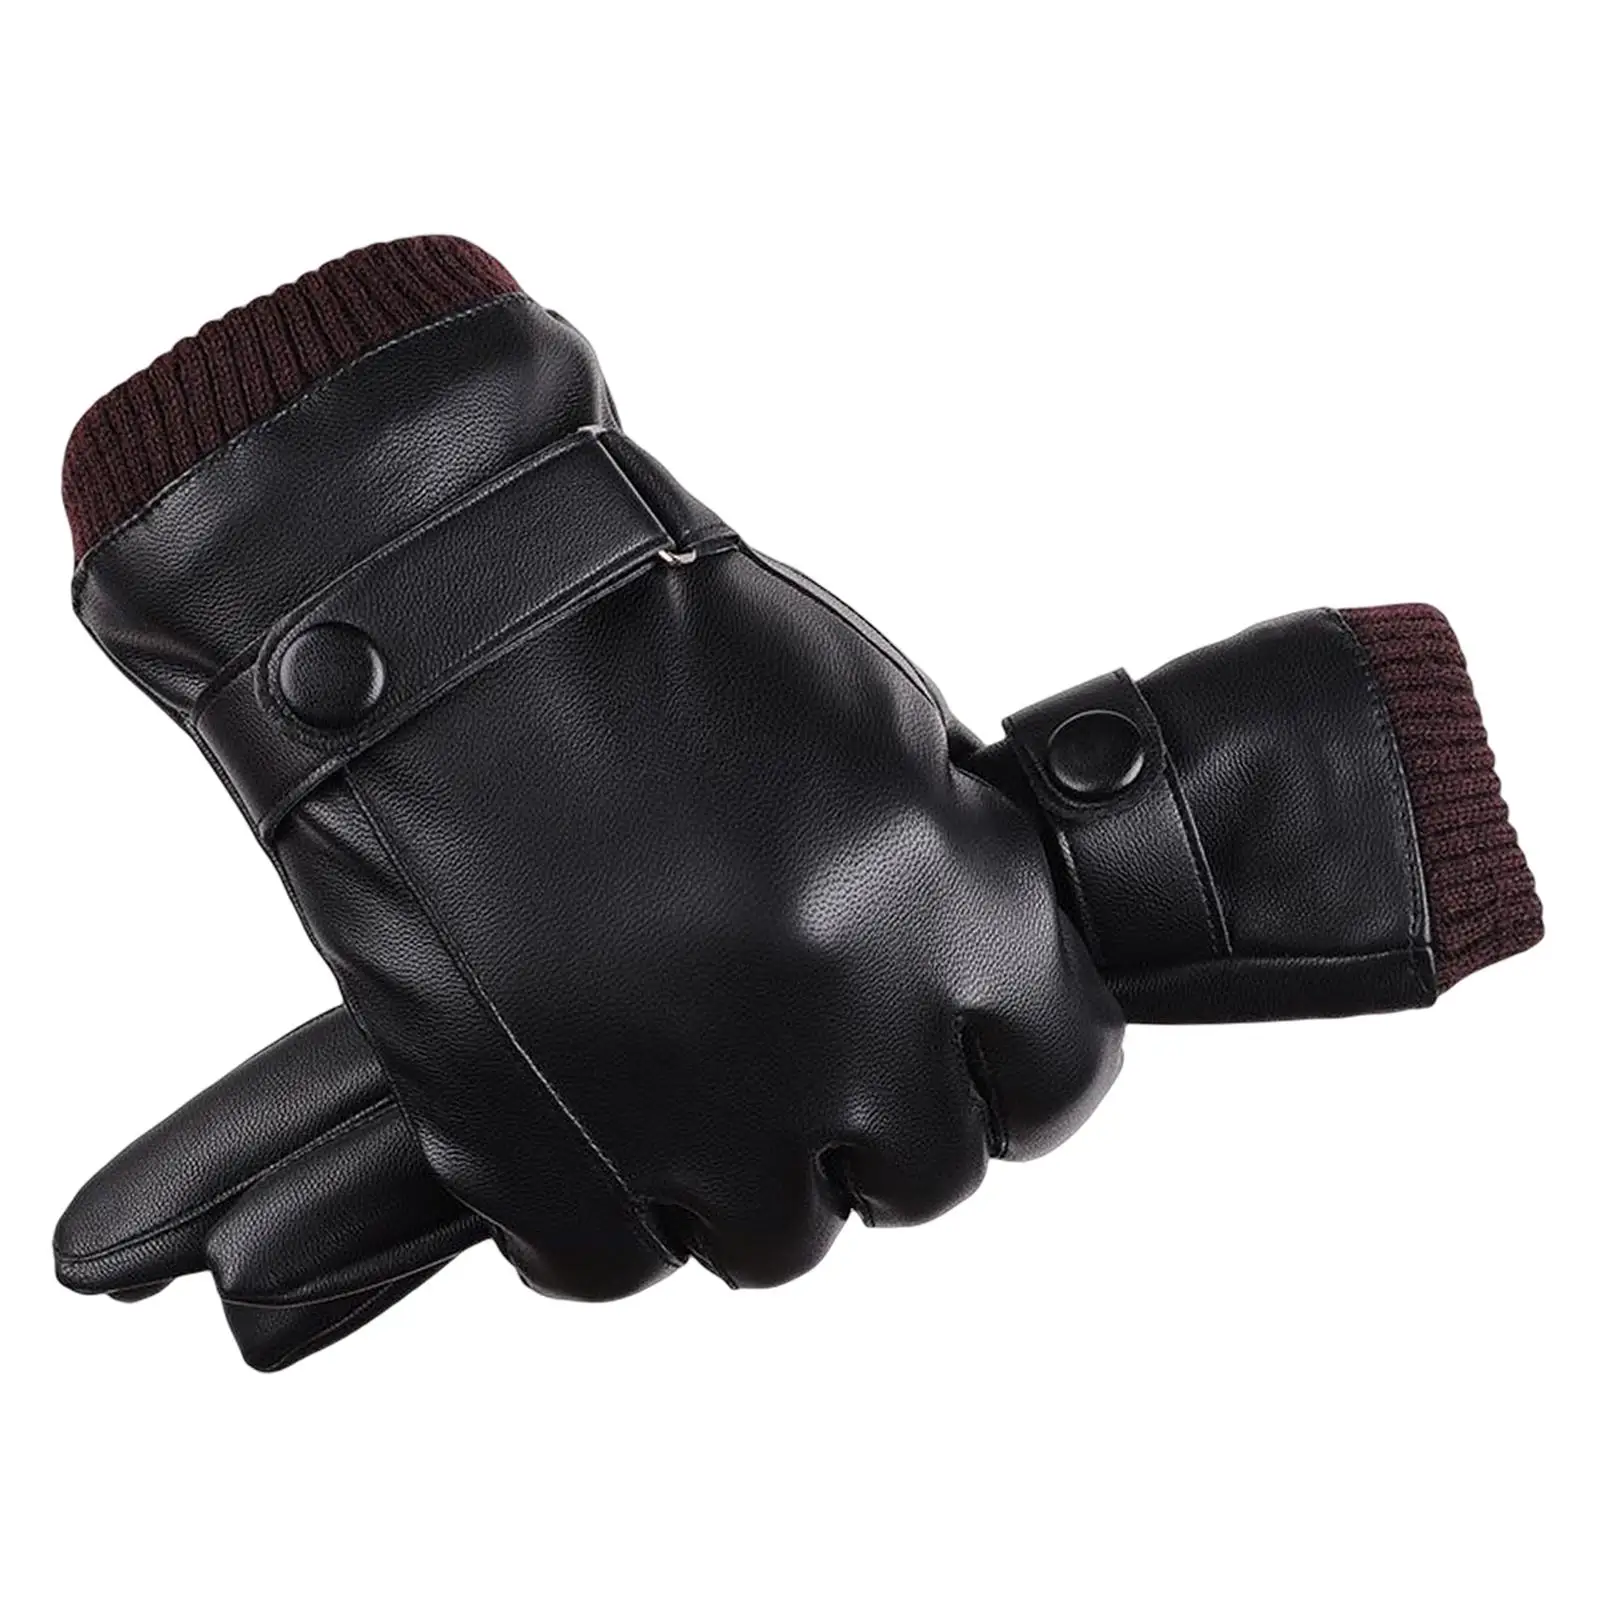 Men Women Winter Gloves PU Leather Touchscreen Texting Winter Thermal Thick Lined Waterproof Warm Gloves for Riding